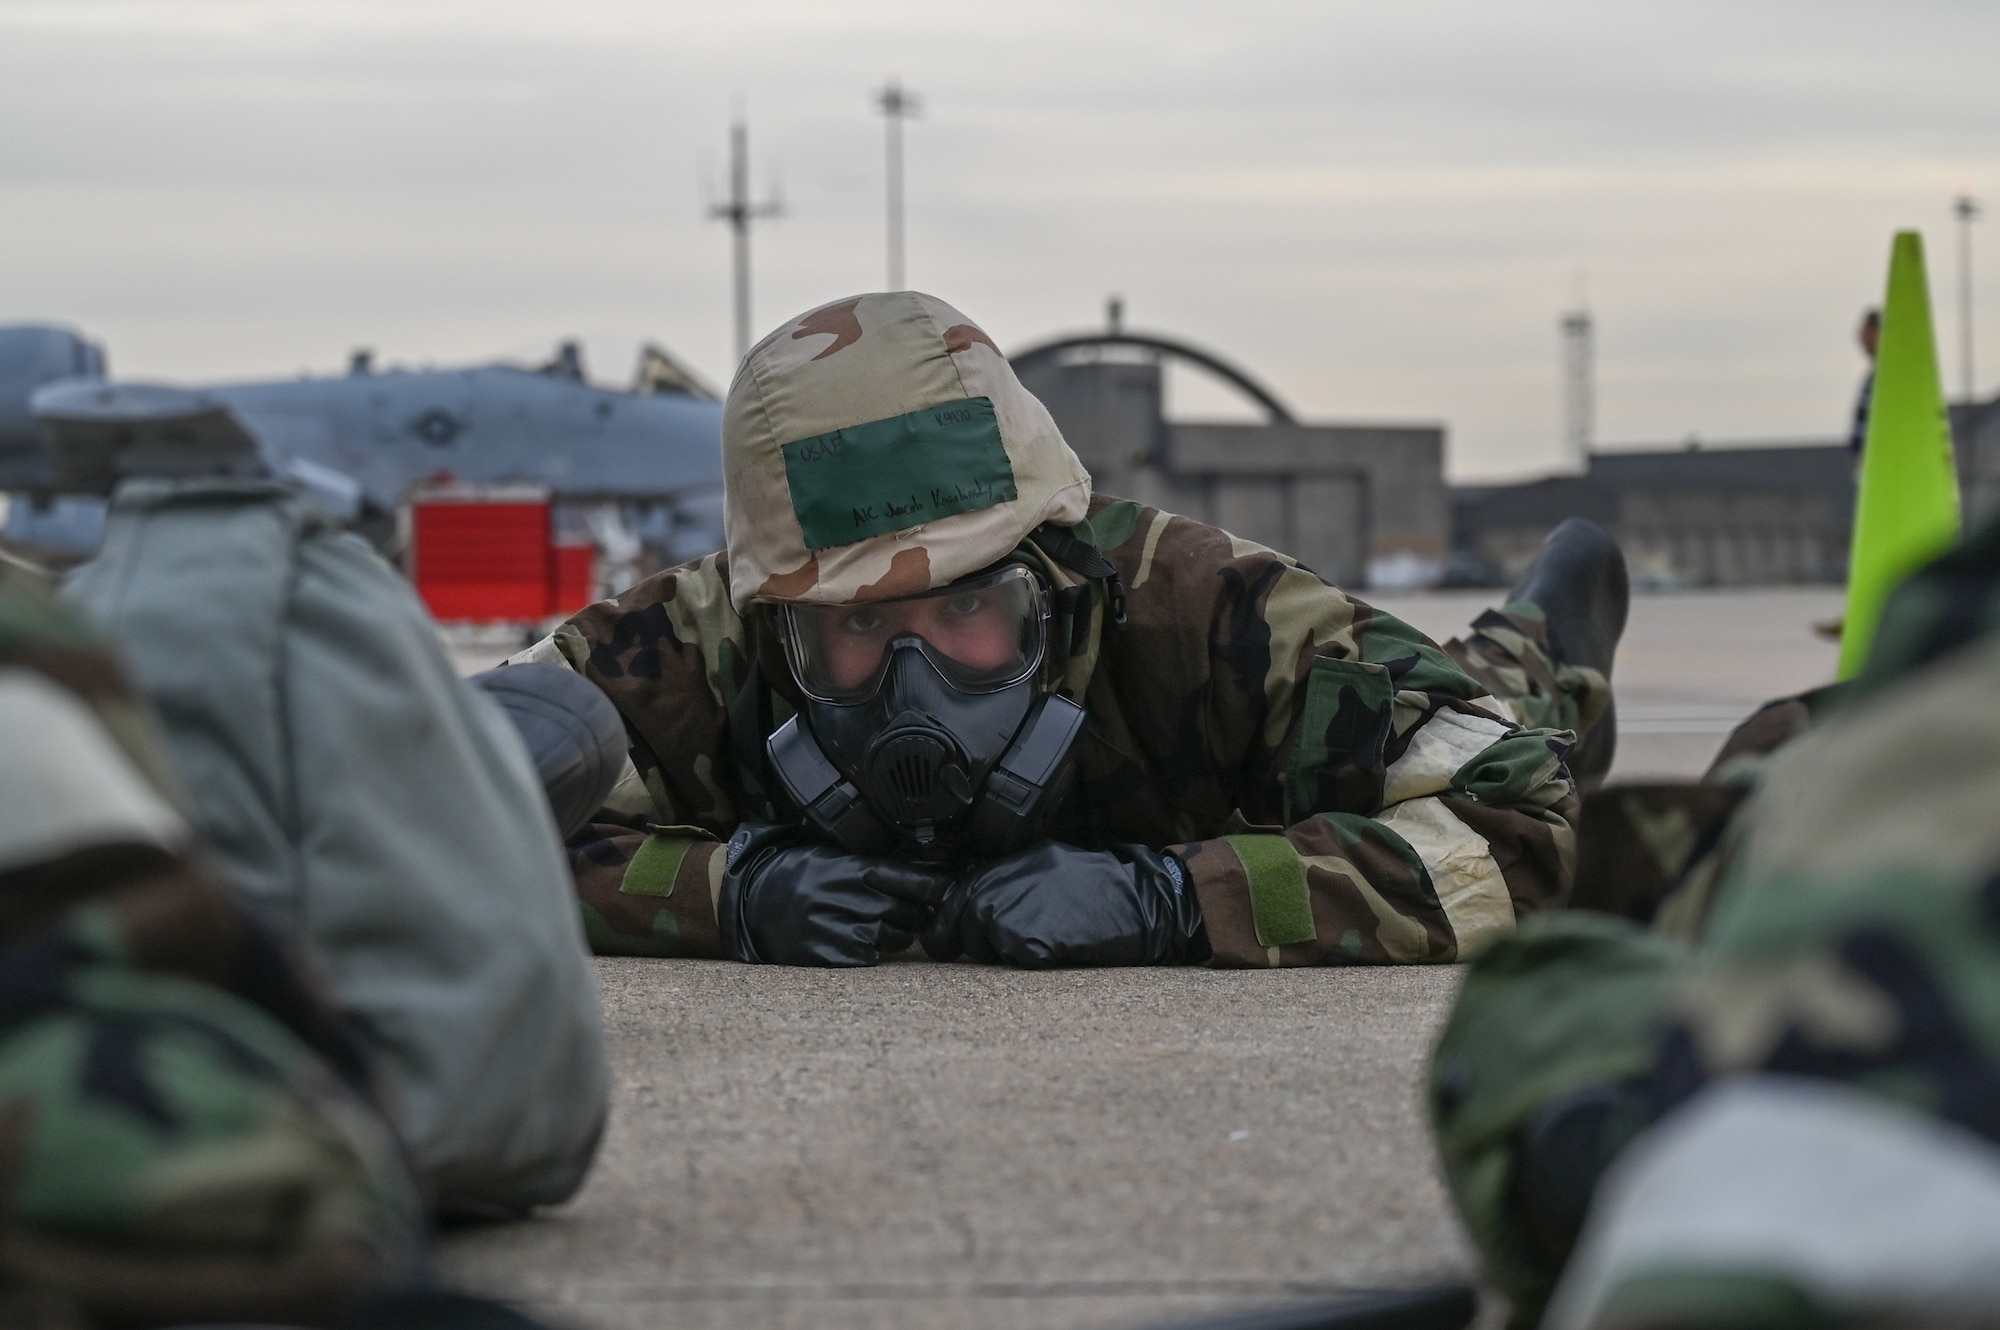 Maryland Air National Guard Airman 1st Class Jacob Kosubinsky, a crew chief assigned to the 175th Maintenance Squadron, takes cover wearing Mission-Oriented Protective Posture (MOPP) gear as the base is notified of a simulated incoming attack during Operation Frosty Strike Dec. 1, 2023, at Martin State Air National Guard Base, Middle River, Md.